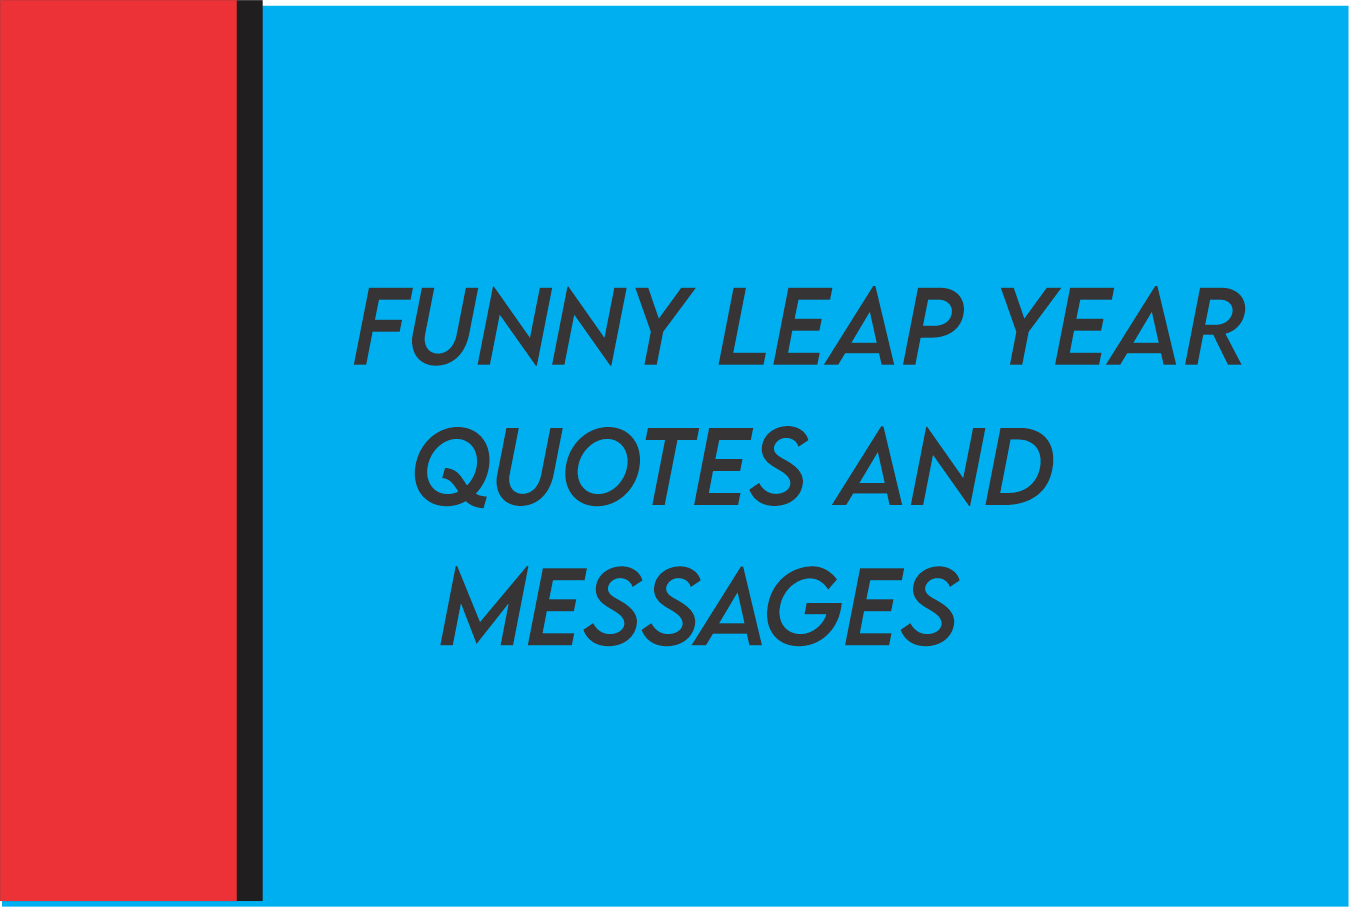 100 Funny And Inspiring Leap Year Quotes And Messages TipsQuotesWishes